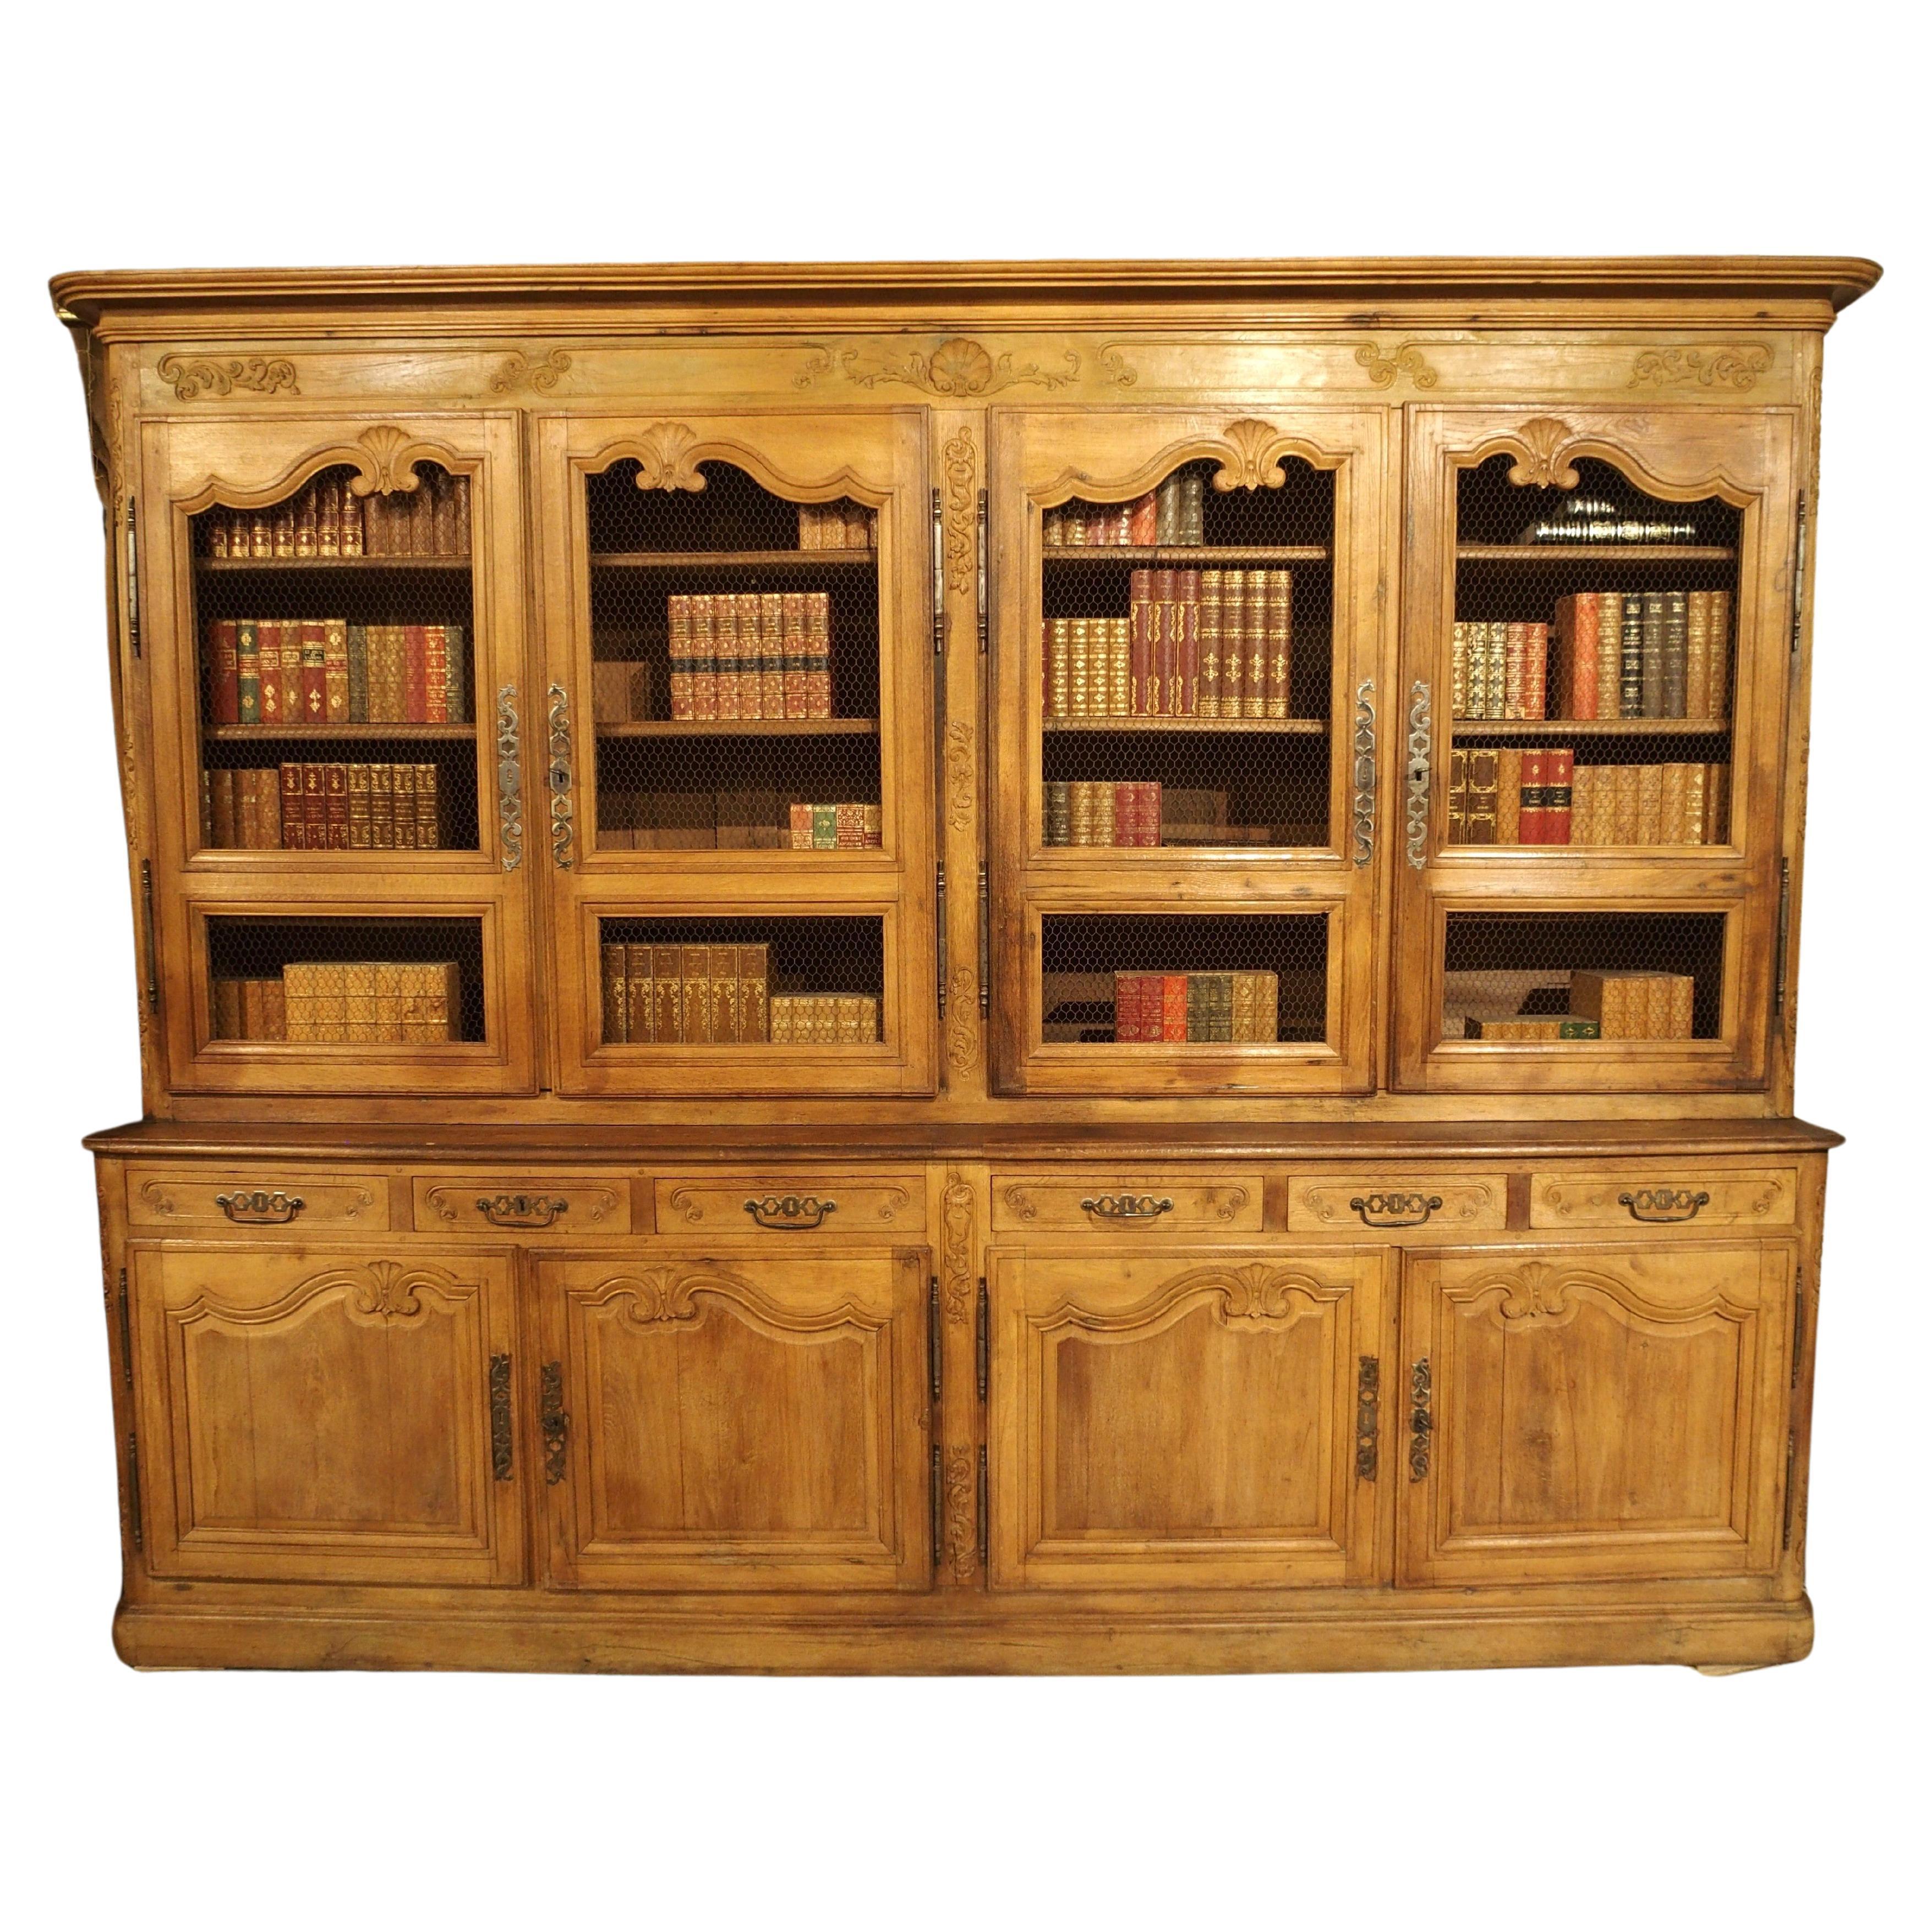 Circa 1800 Carved Oak and Wire Paneled Double Bibliothèque from Southwest France For Sale